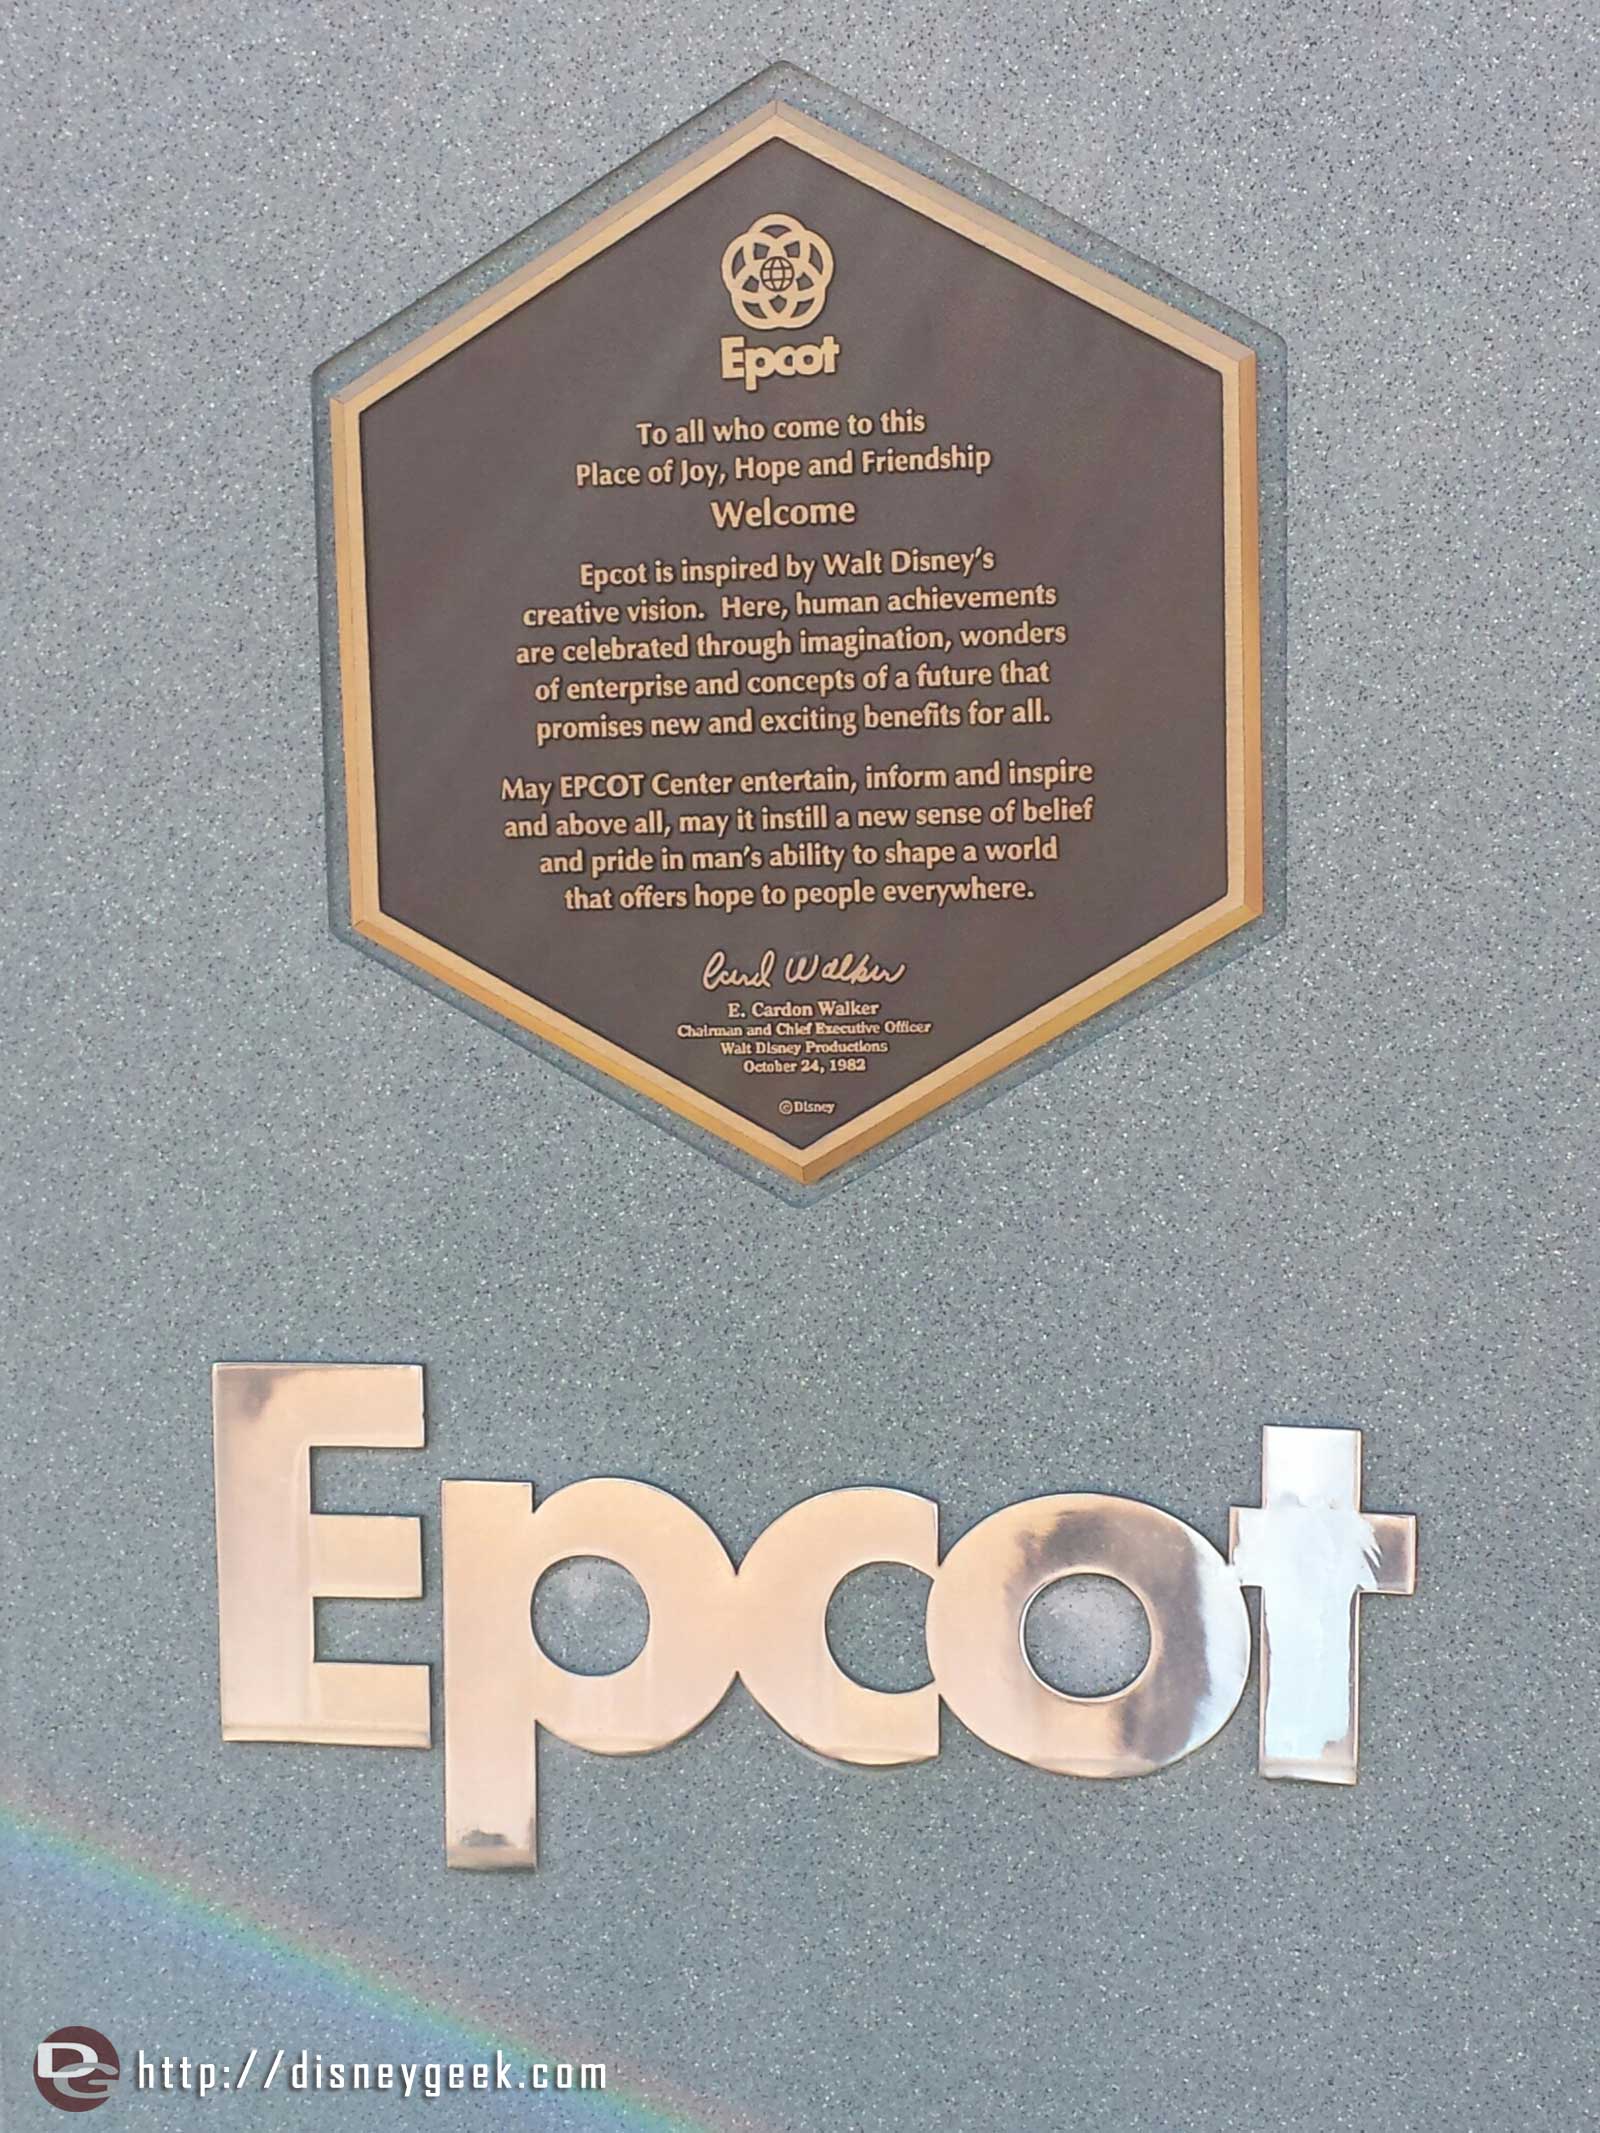 Walked by the dedication plaque for Epcot so had to take a picture.